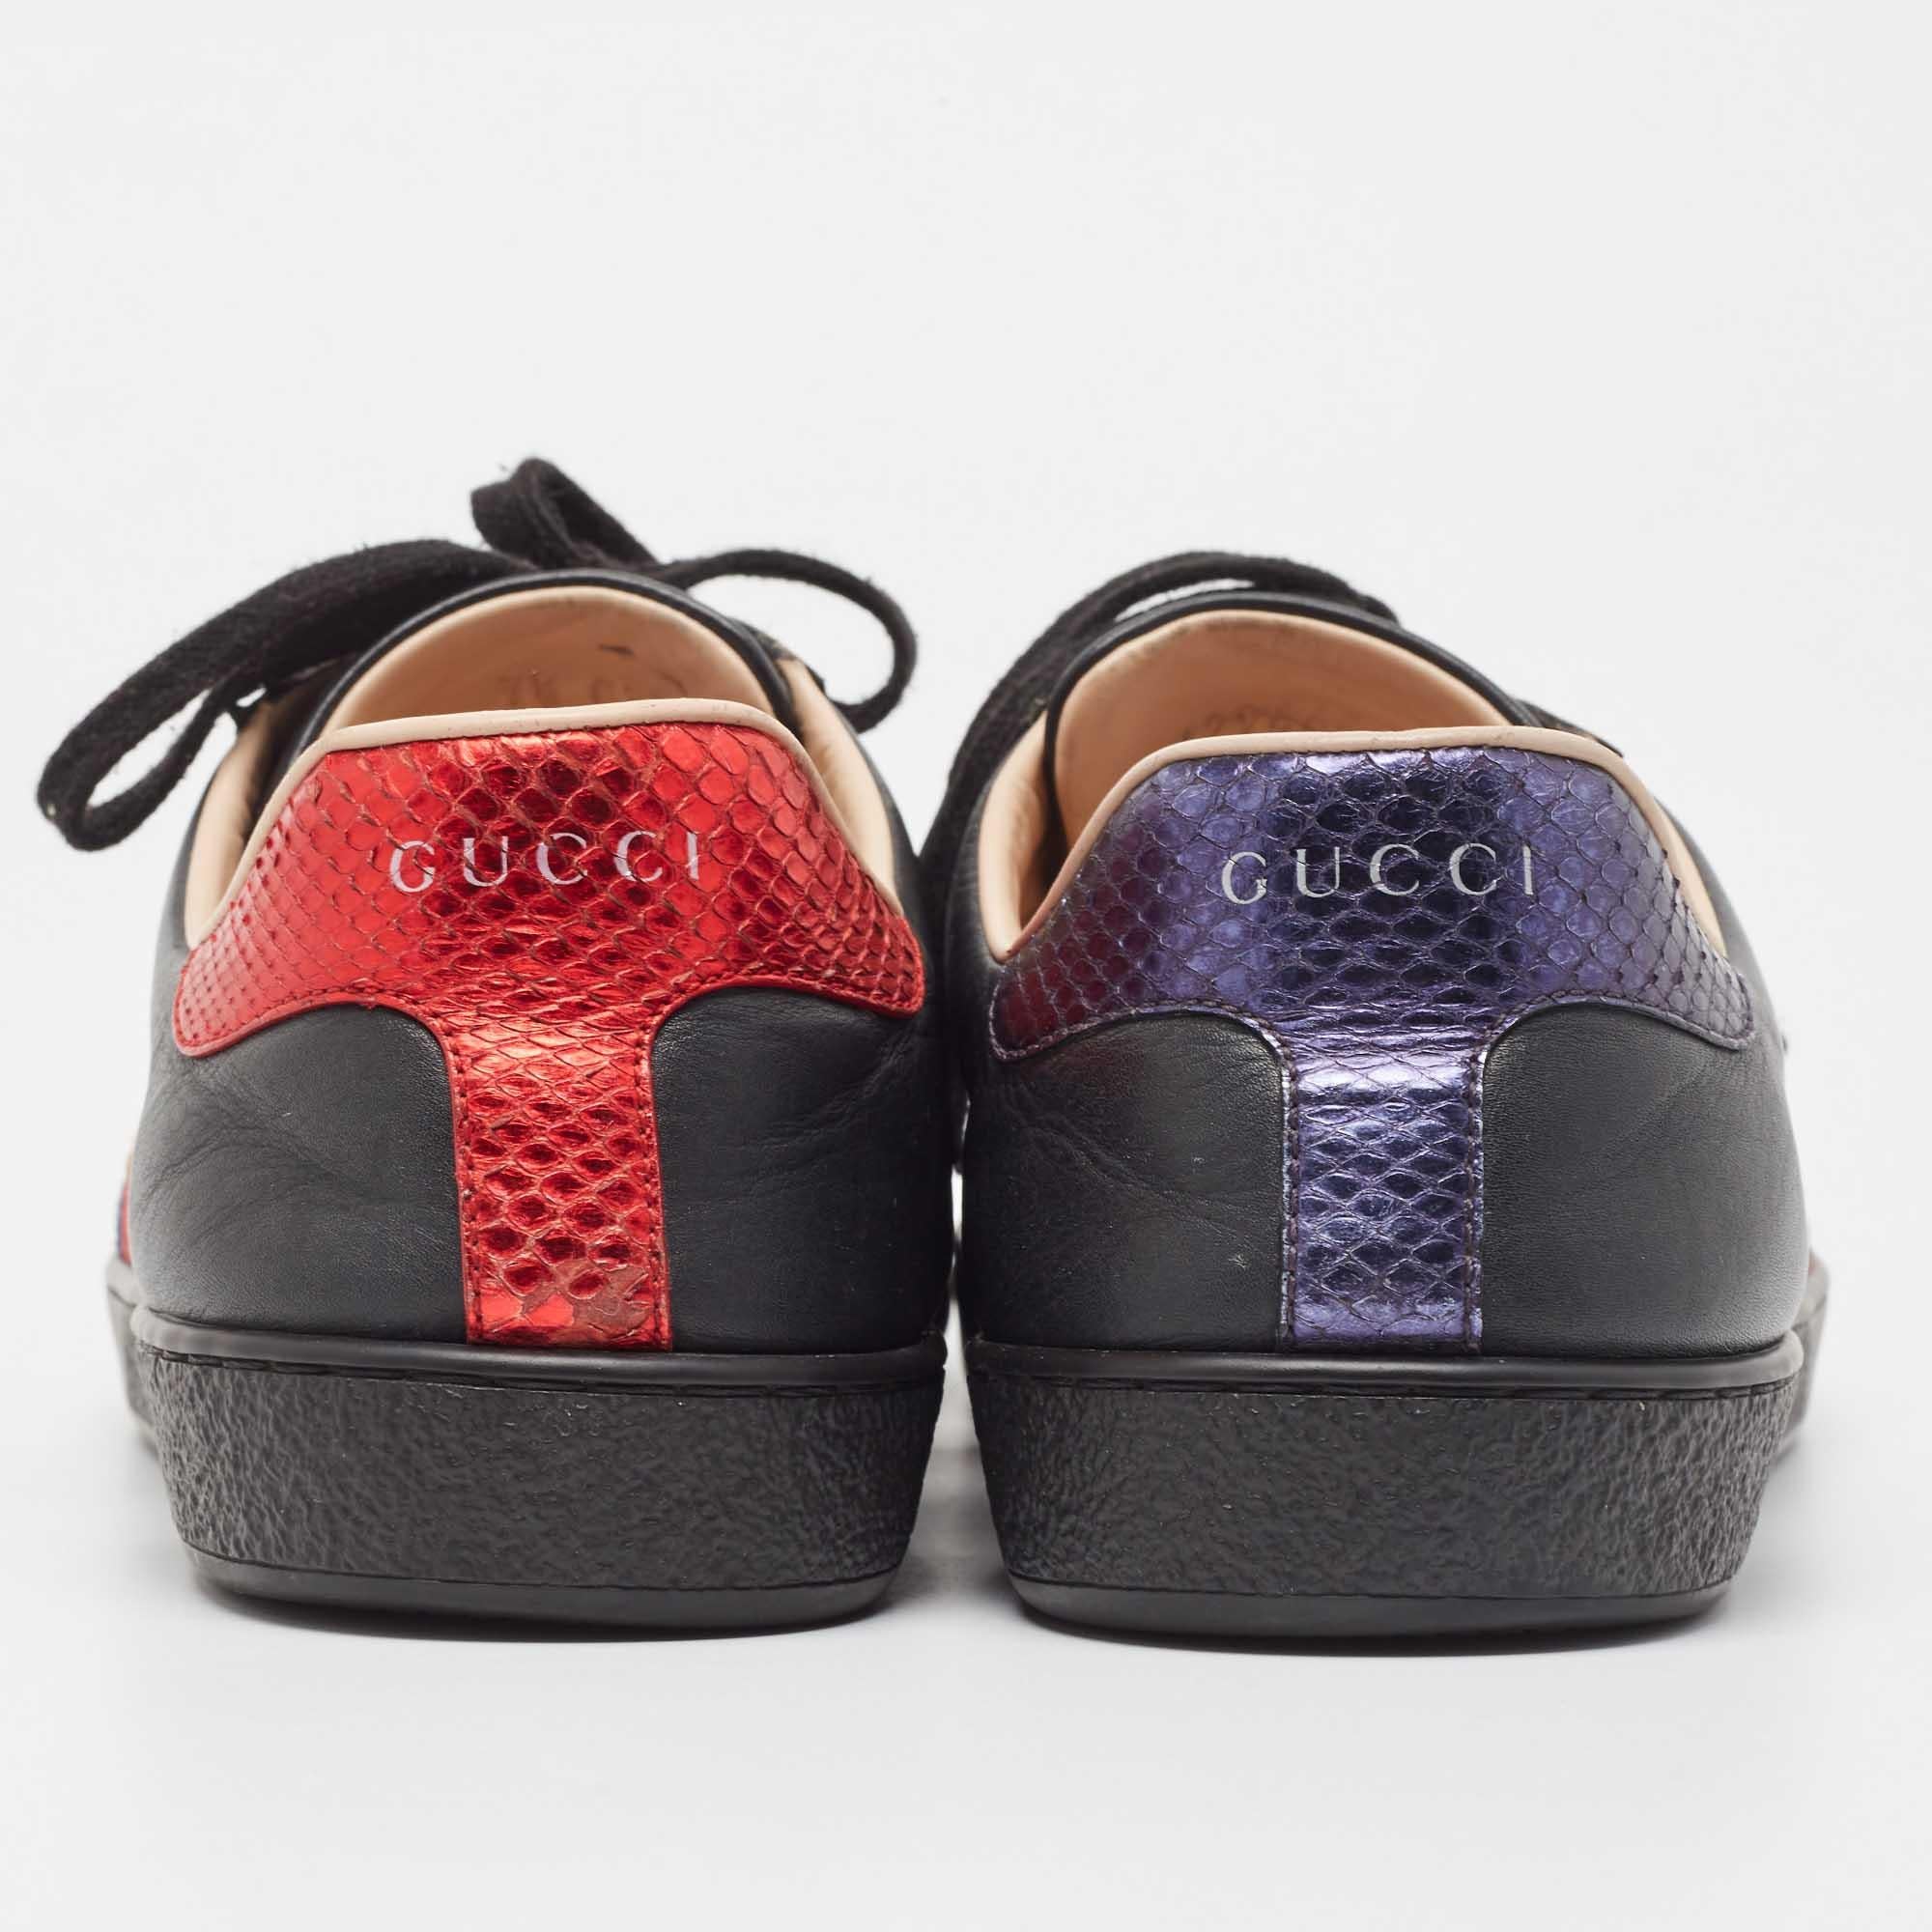 Gucci Black Leather Embroidered Bee Ace Sneakers Size 41.5 For Sale 4